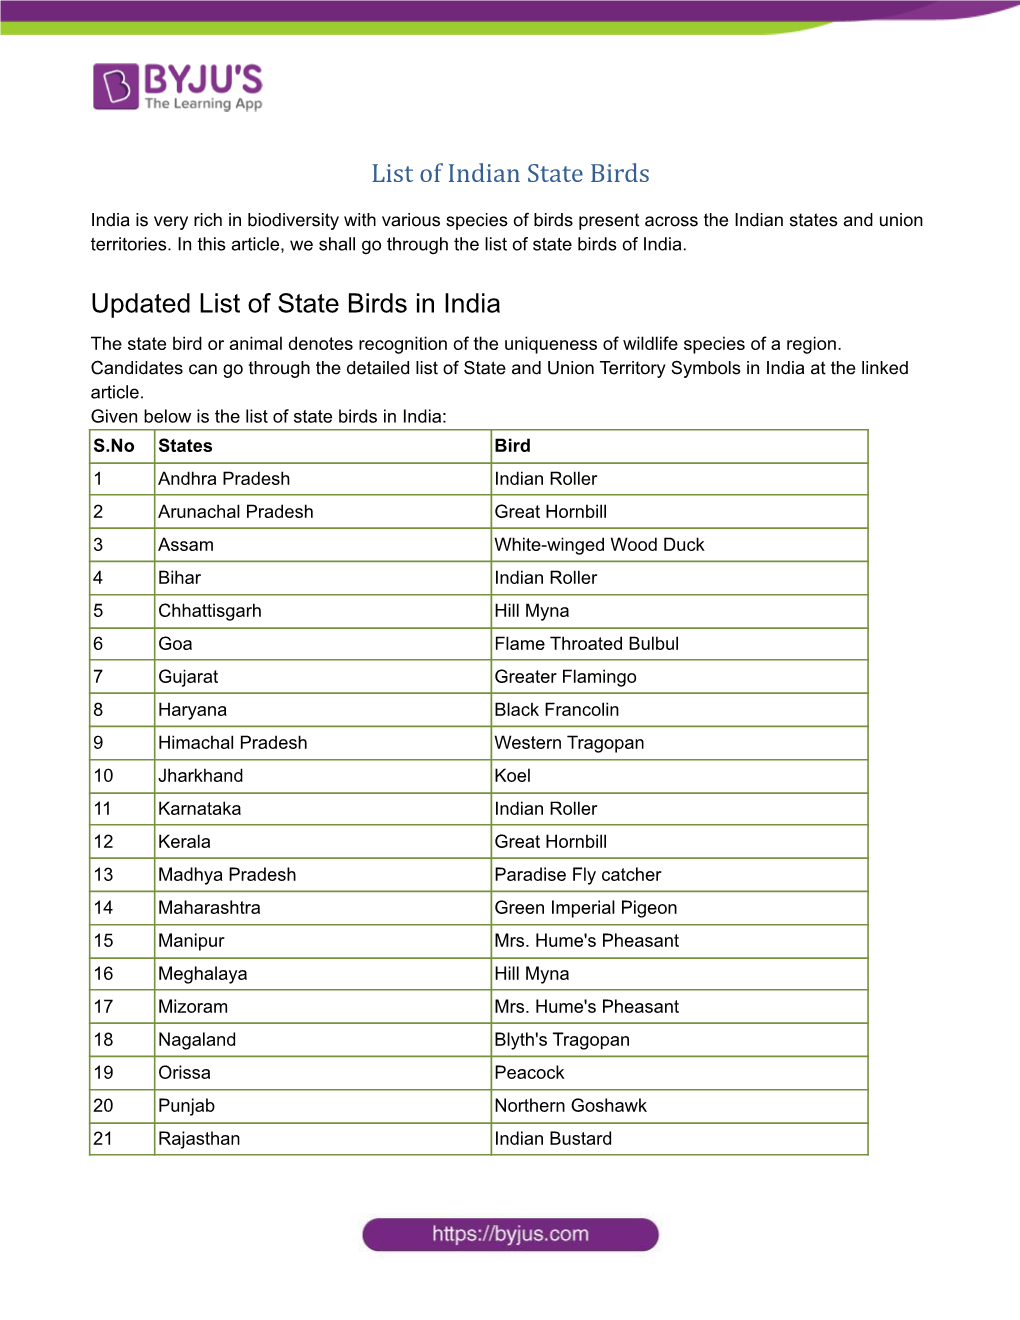 List of Indian State Birds